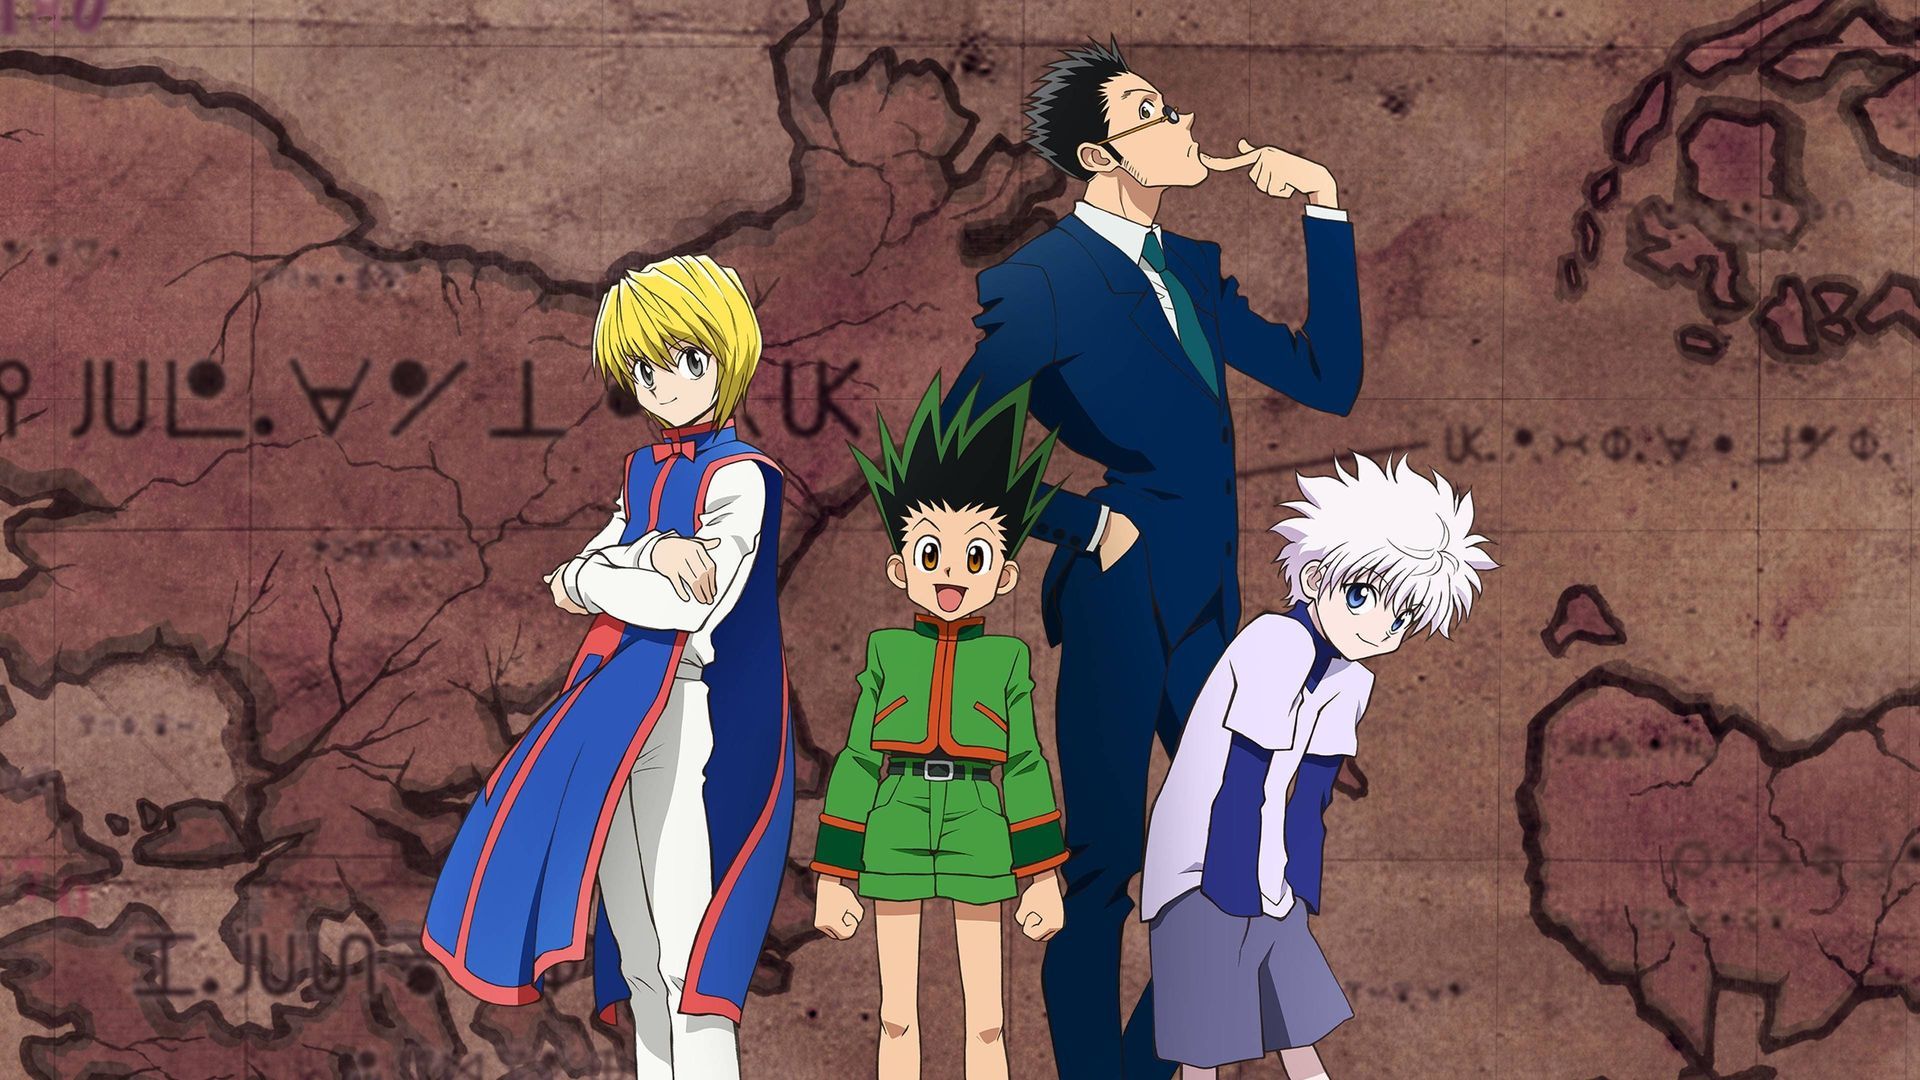 Hunter X Hunter - Episode 3 [English Subbed]  Hunter X Hunter - Episode 3  [English Subbed] Gon Freecss aspires to become a Hunter, an exceptional  being capable of greatness. With his